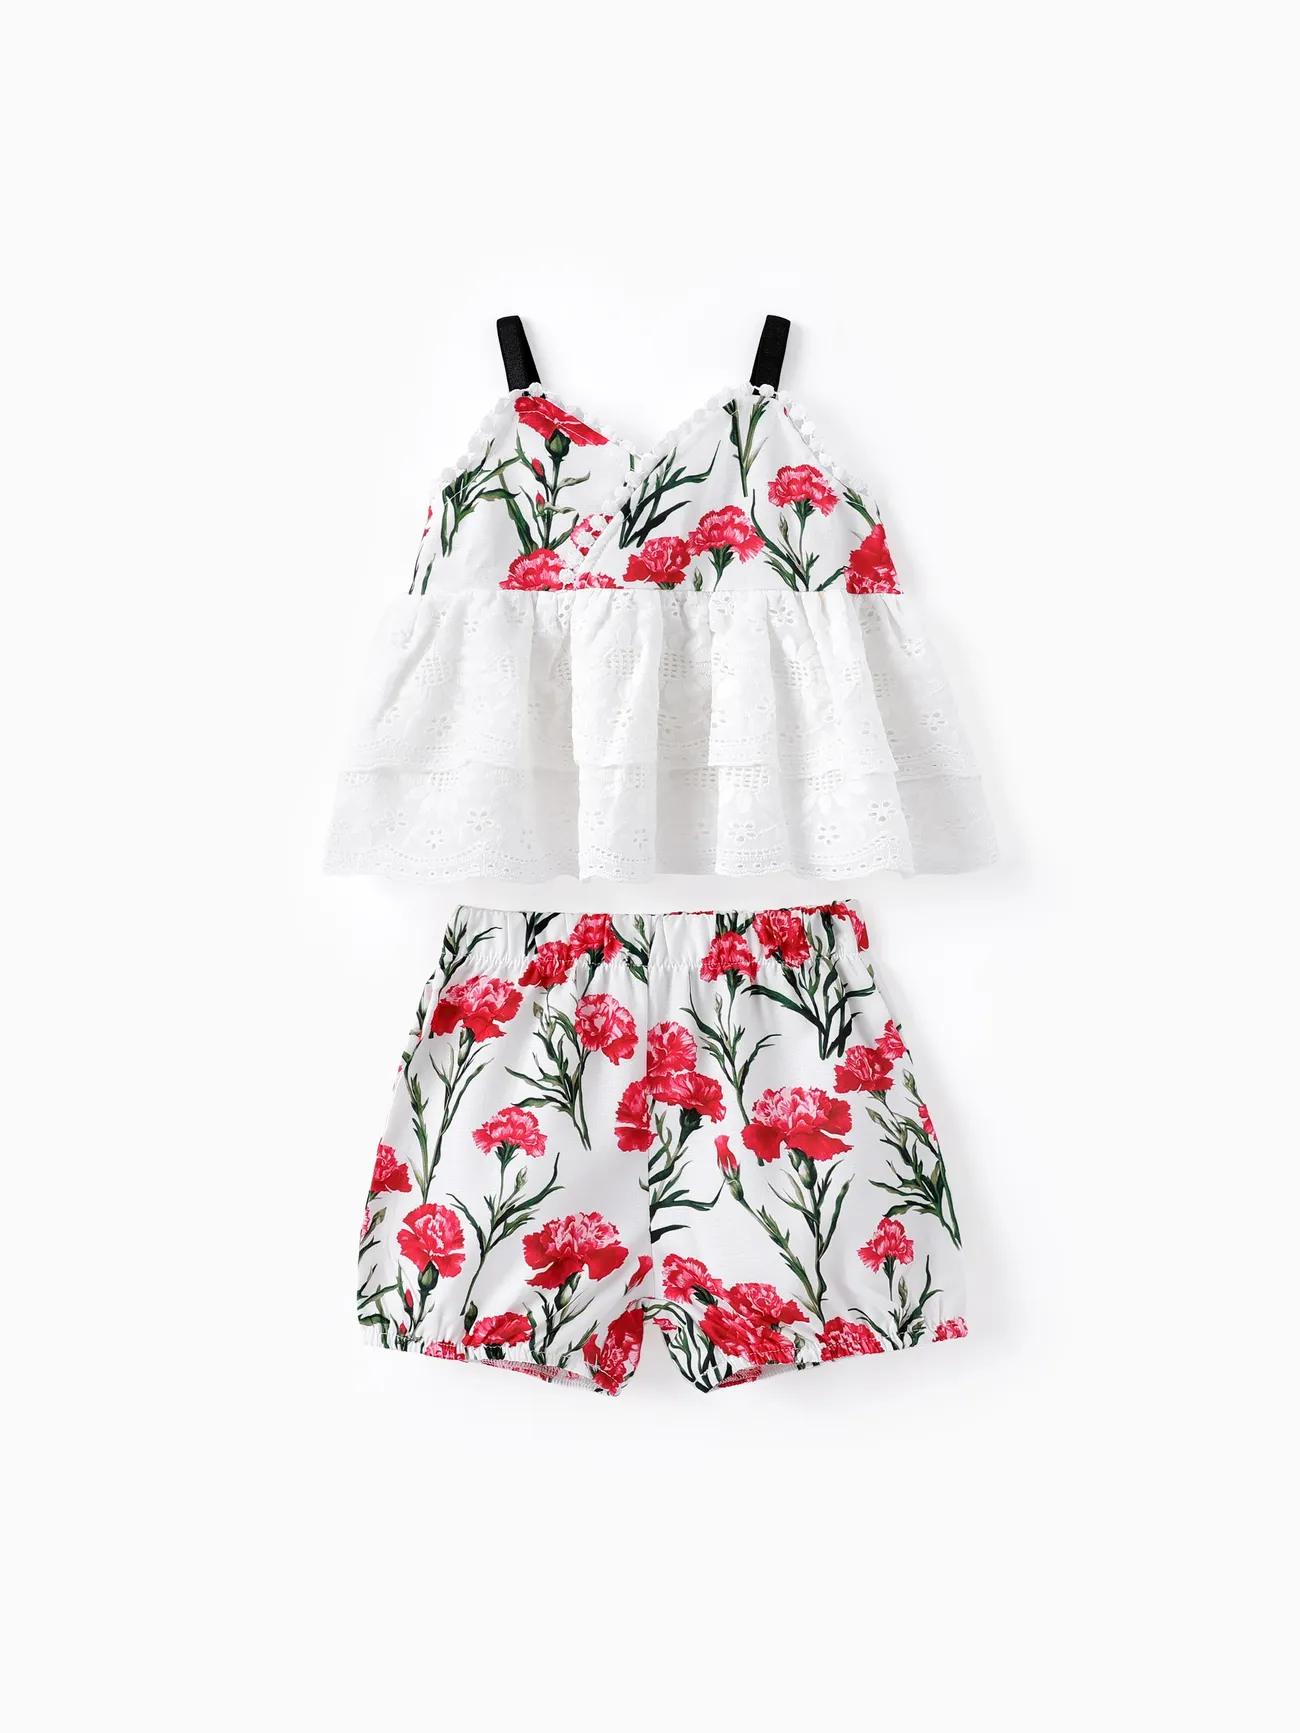 Baby/Toddler Girl 2pcs Floral Print Mesh Camisole and Shorts Set White big image 1